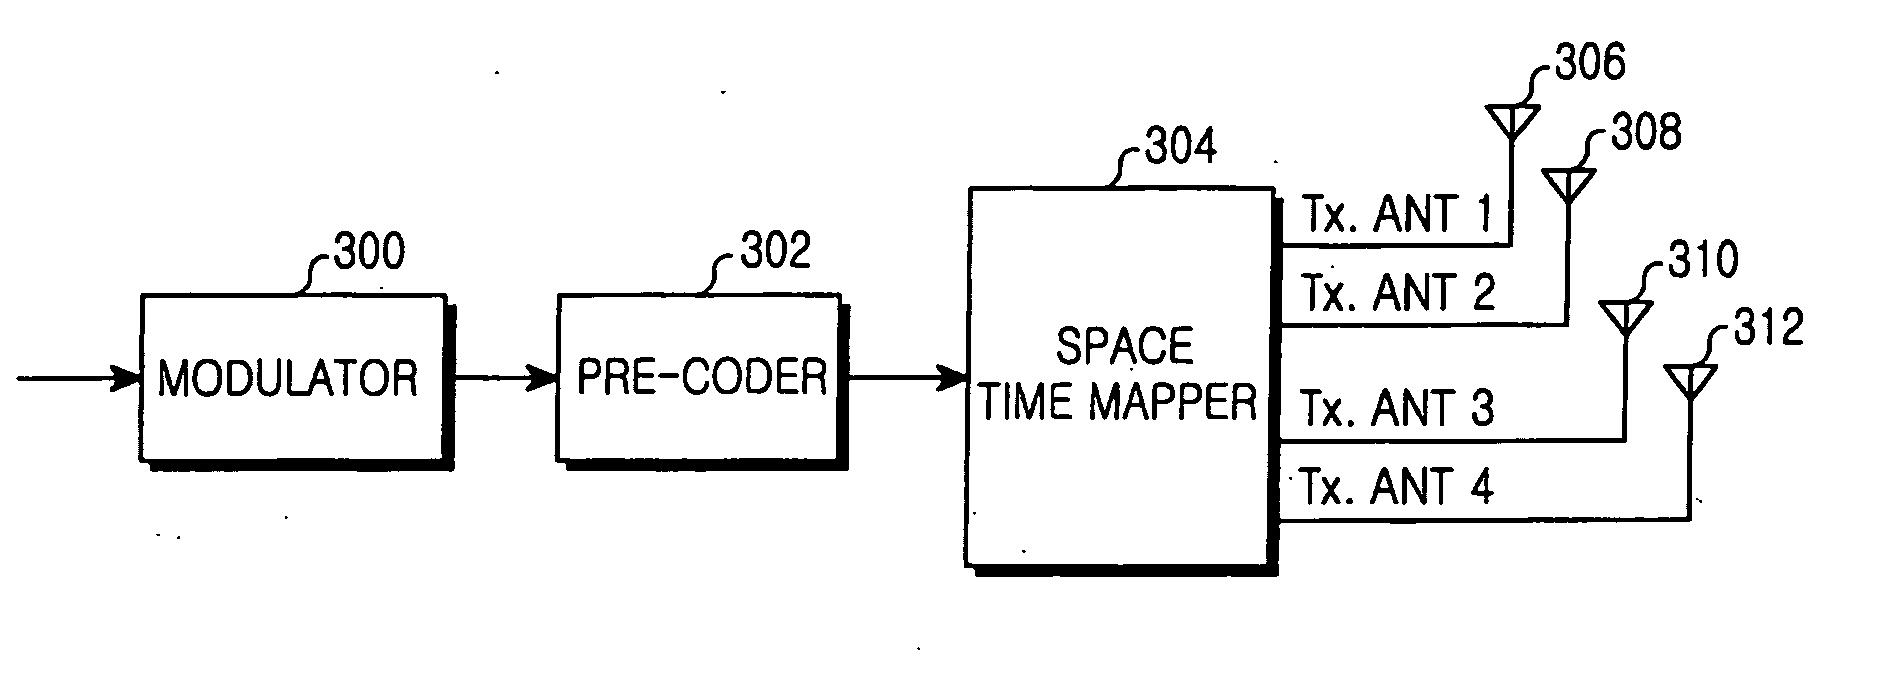 Apparatus and method for encoding/decoding space tine block code in a mobile communication system using multiple input multiple output scheme